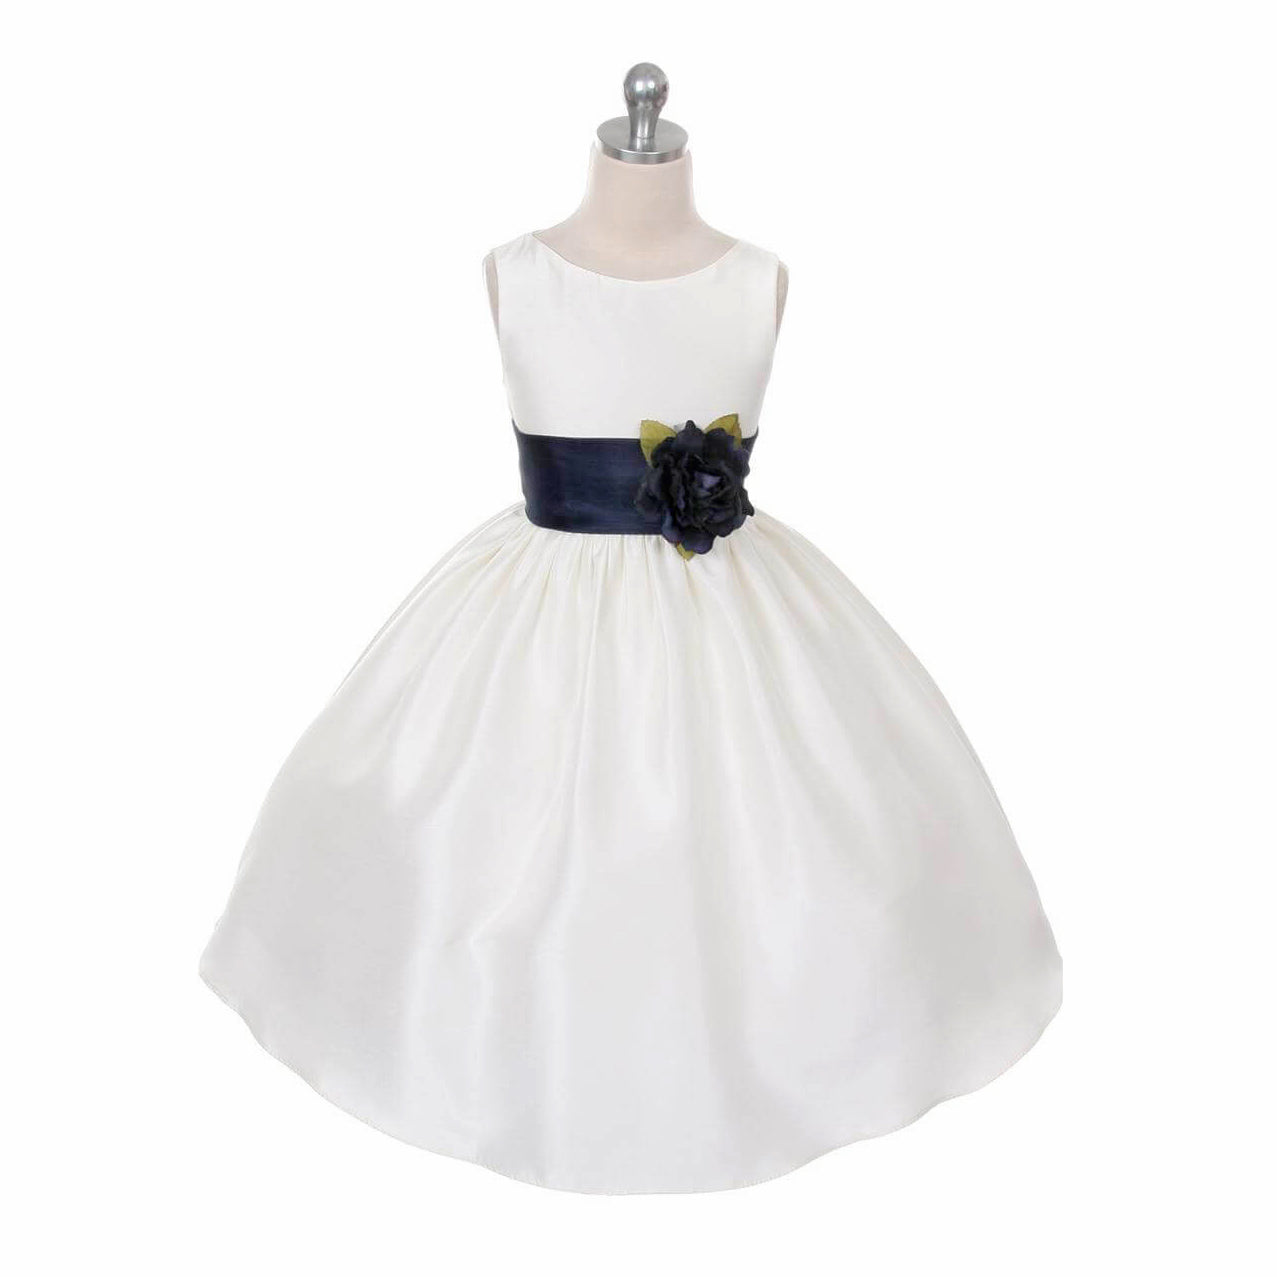 Morgan dress in white with navy sash on mannequin